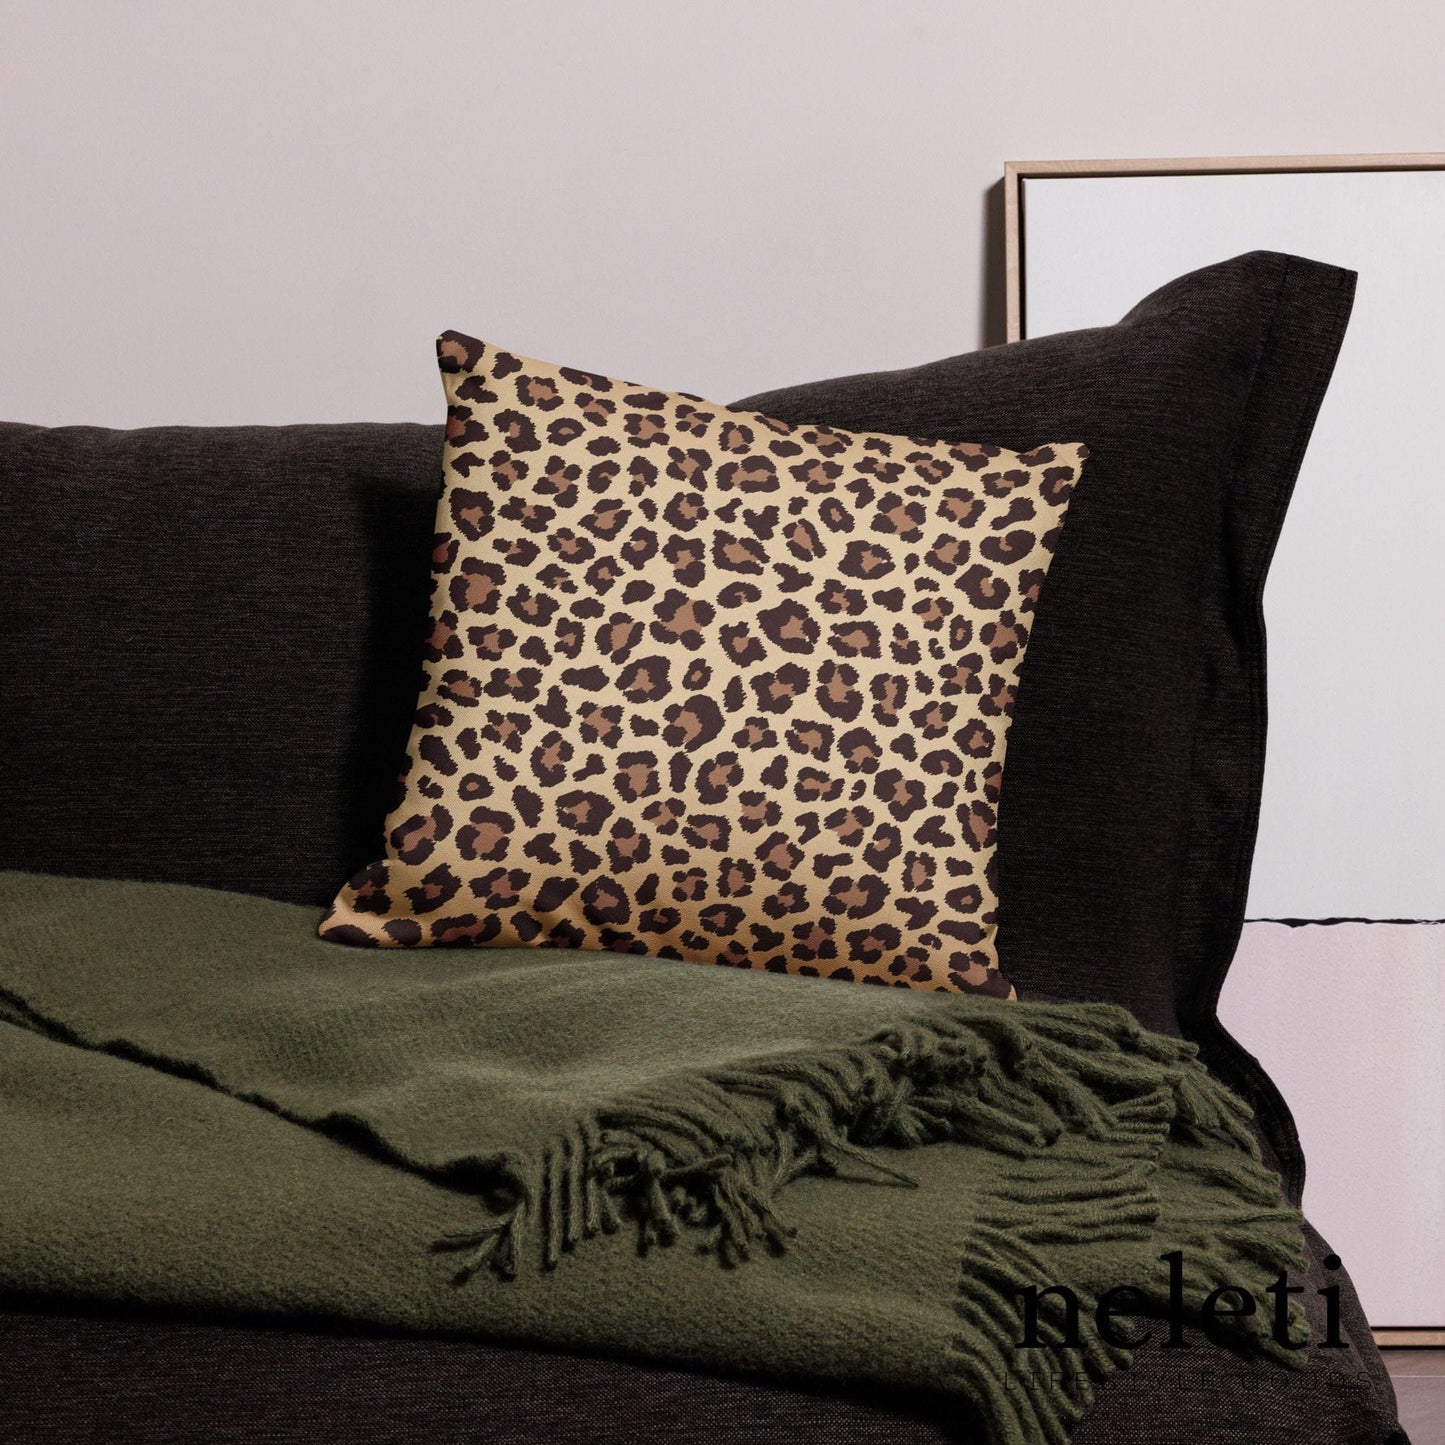 neleti.com-leopard-print-throw-pillow-in-size-18x18-inches